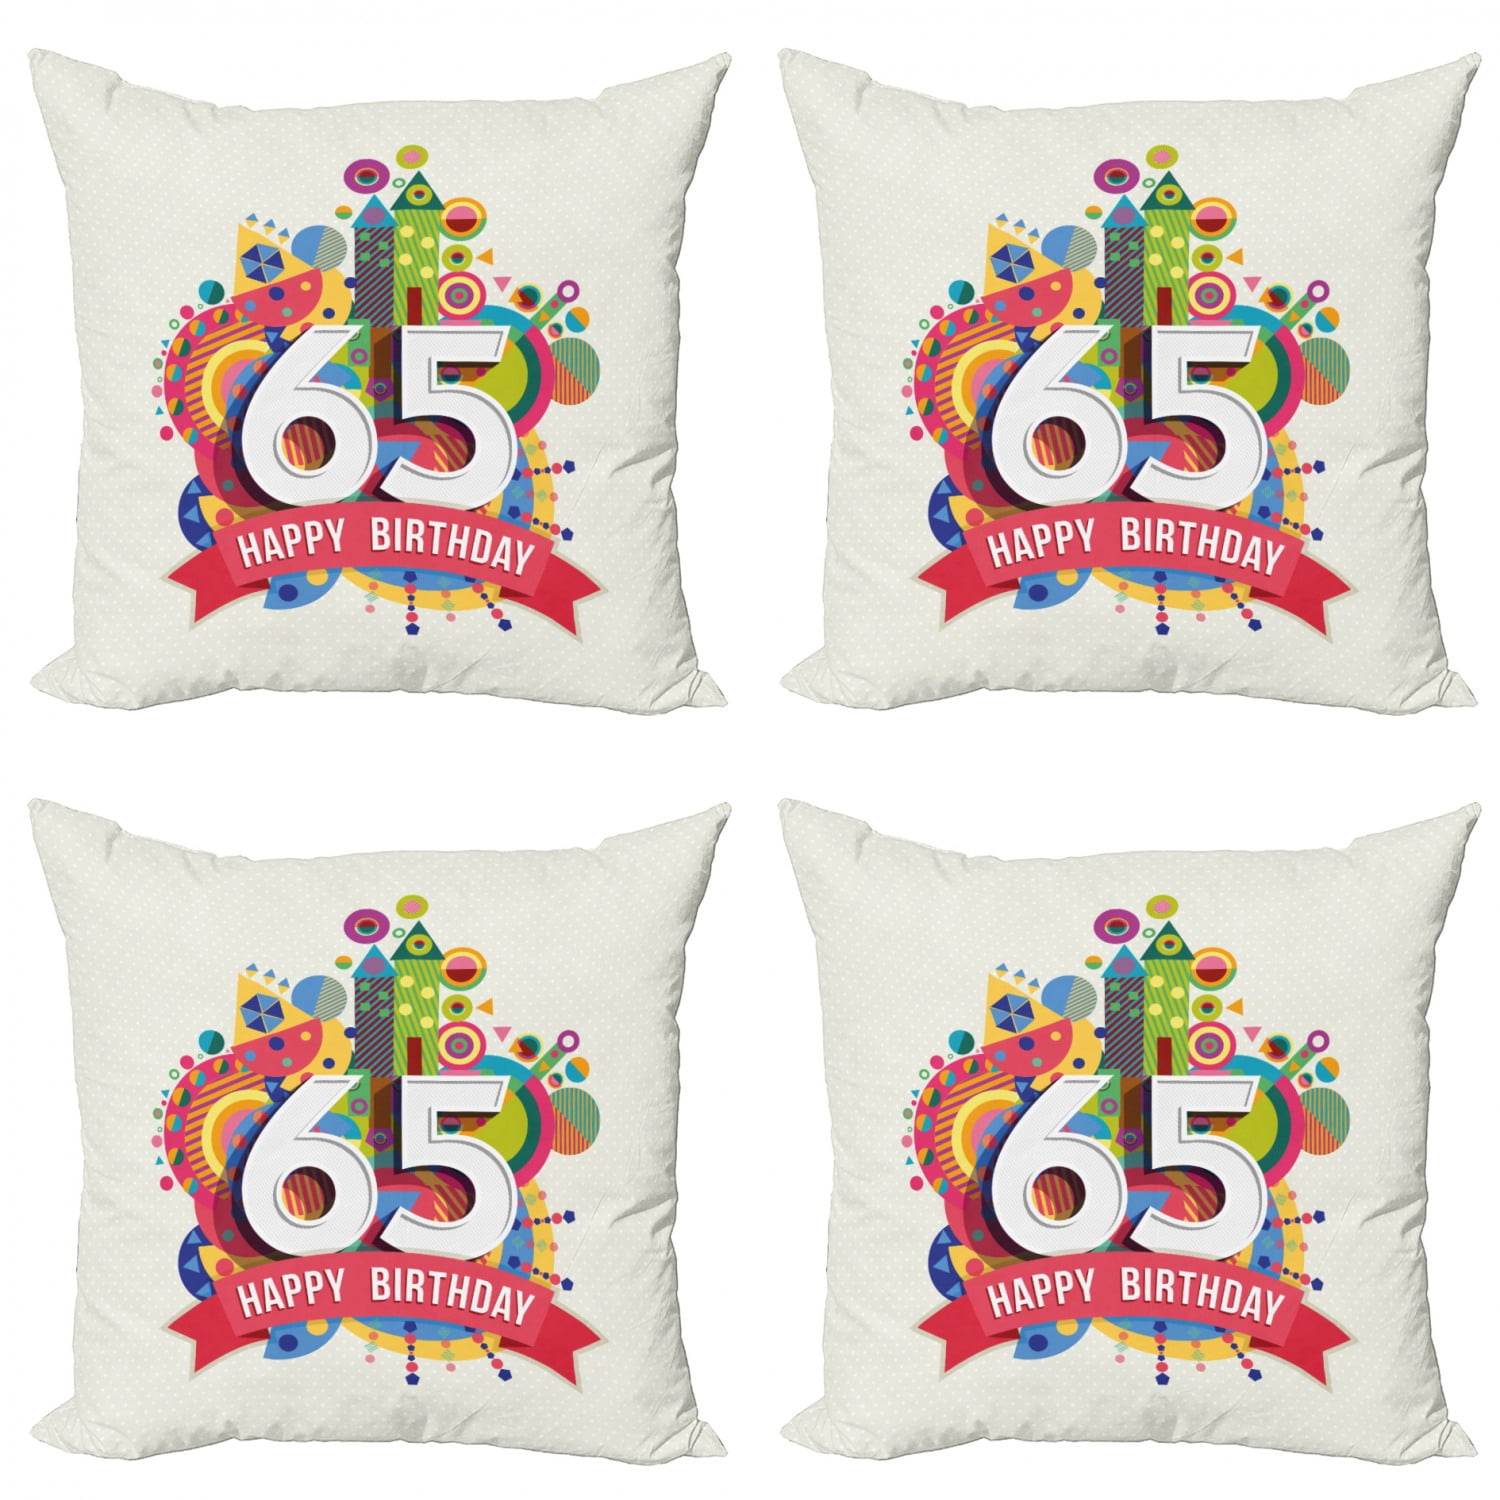 18x18 Multicolor Funny Saying Novelty Design Colored Saying Let's Talk About The Theater Throw Pillow